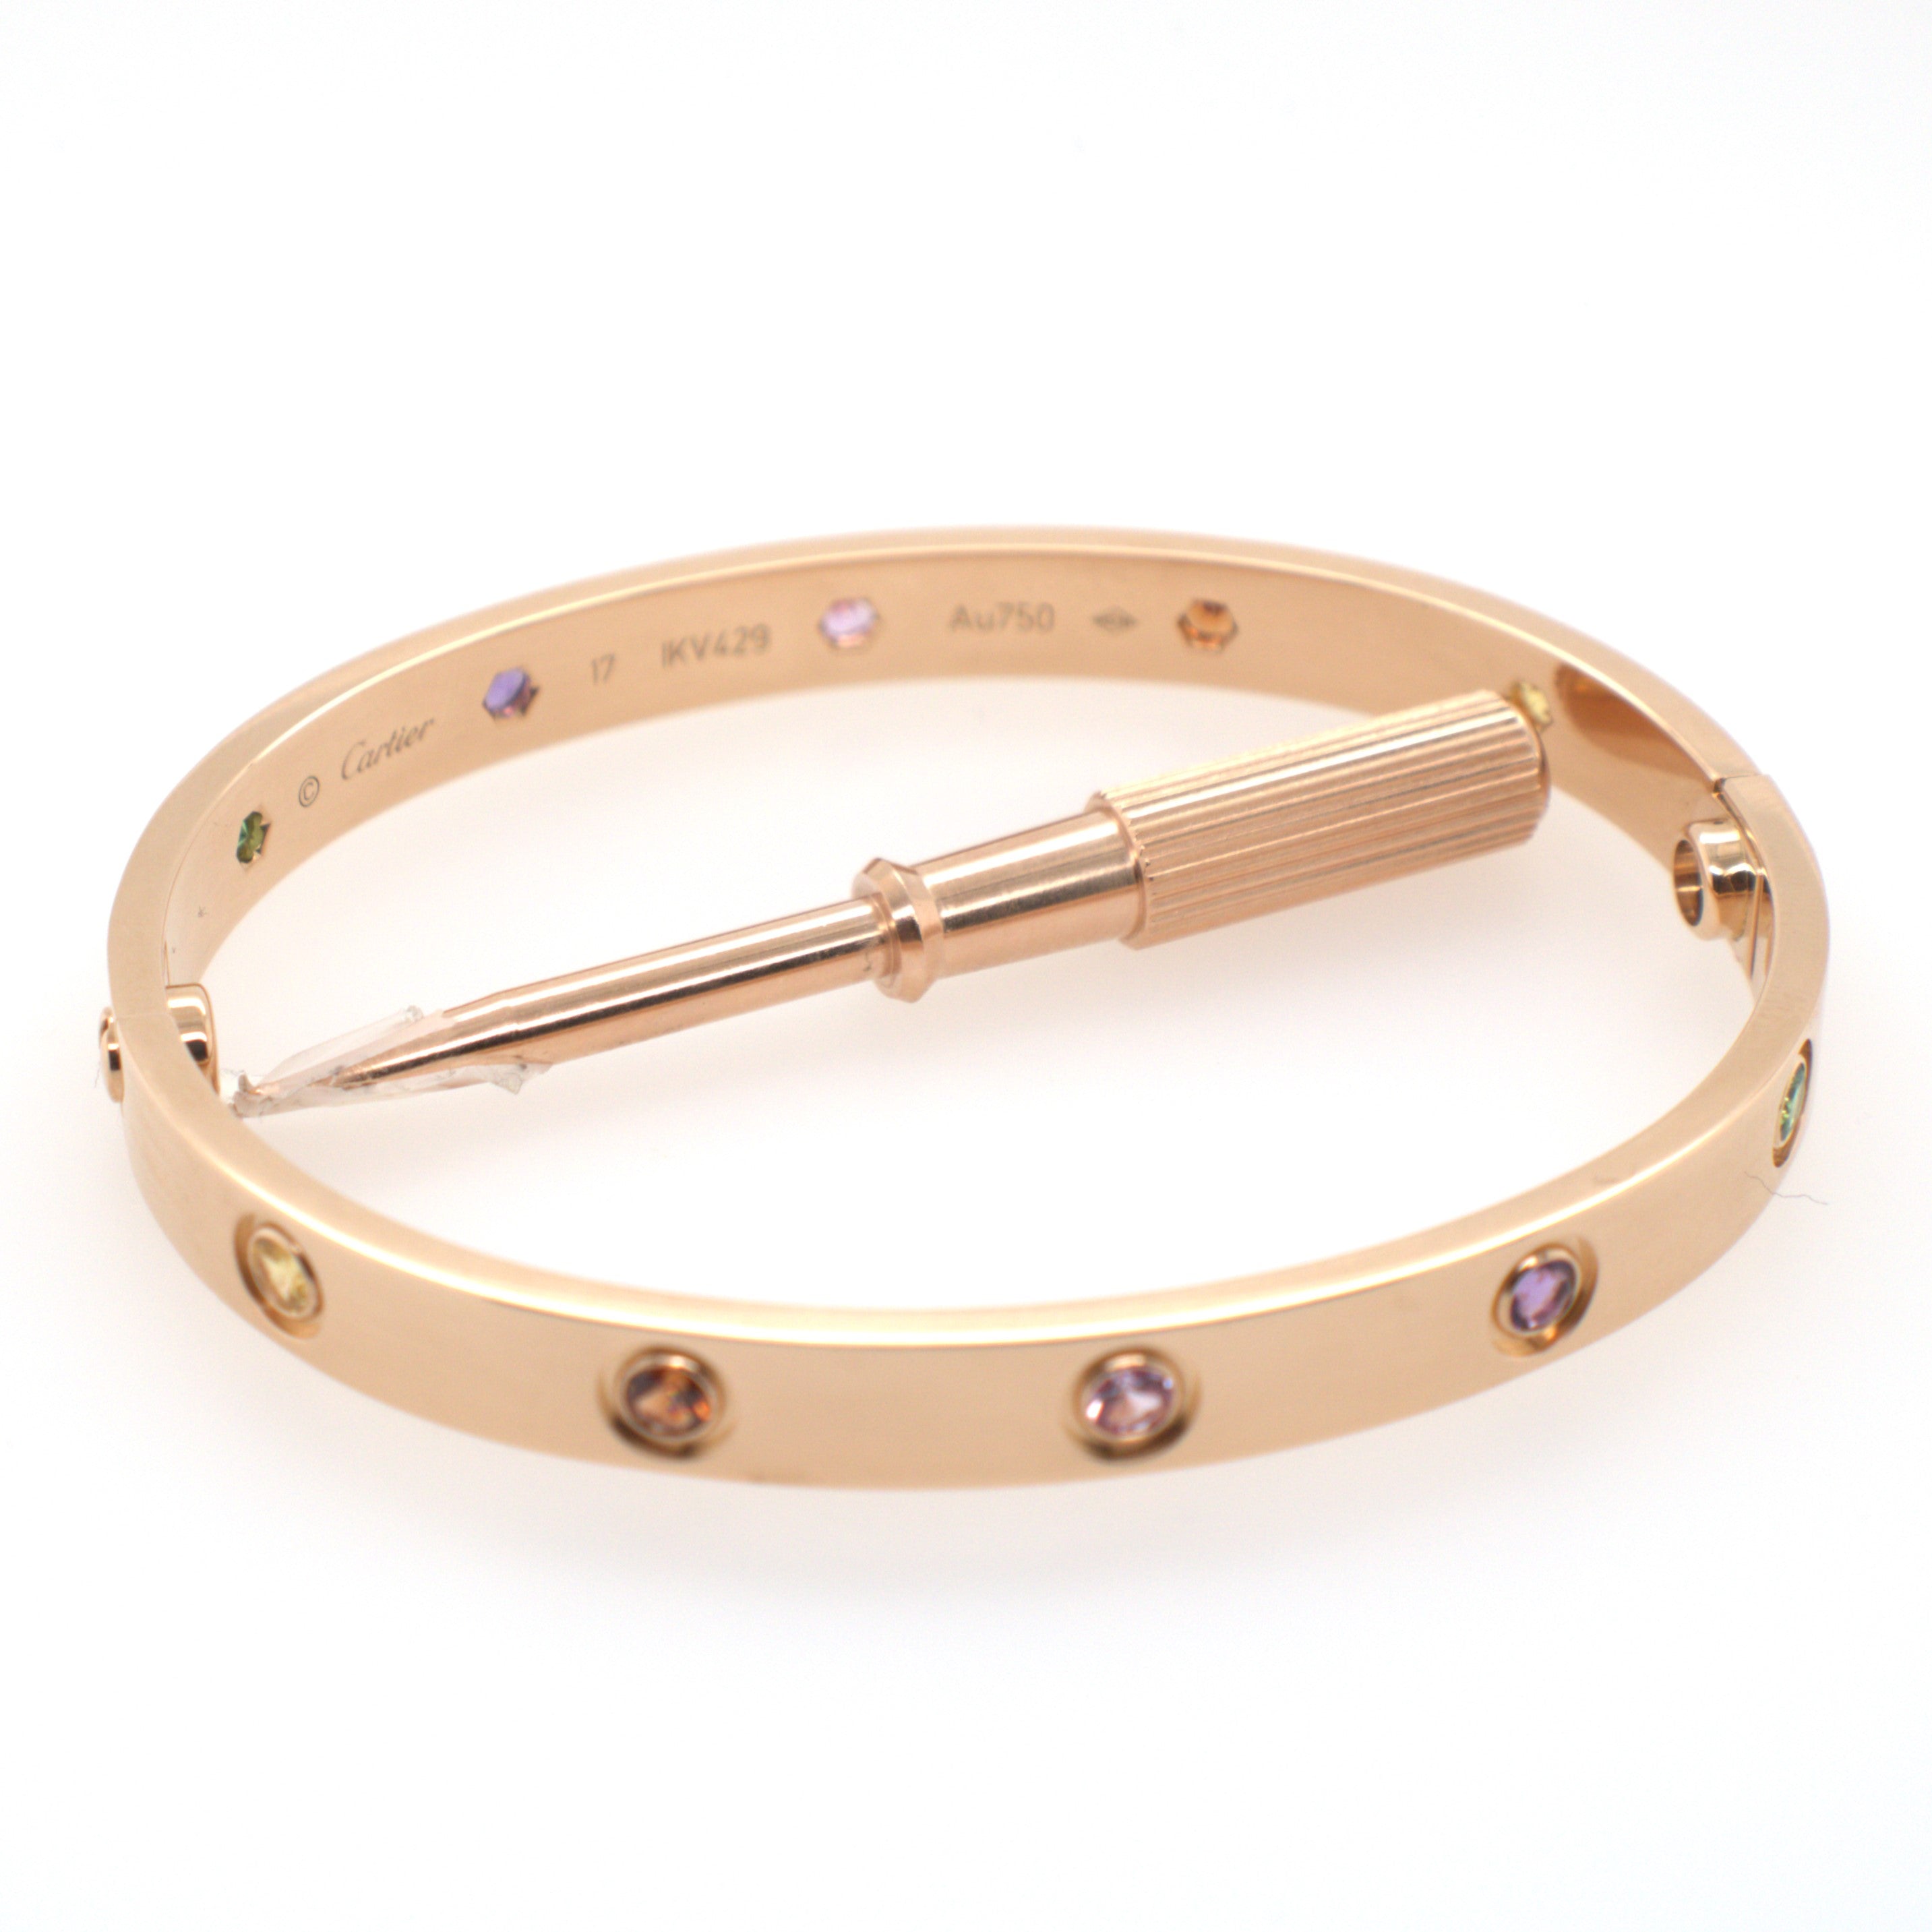 Cartier Bangle with Multi-color Gemstones in 18K Rose Gold